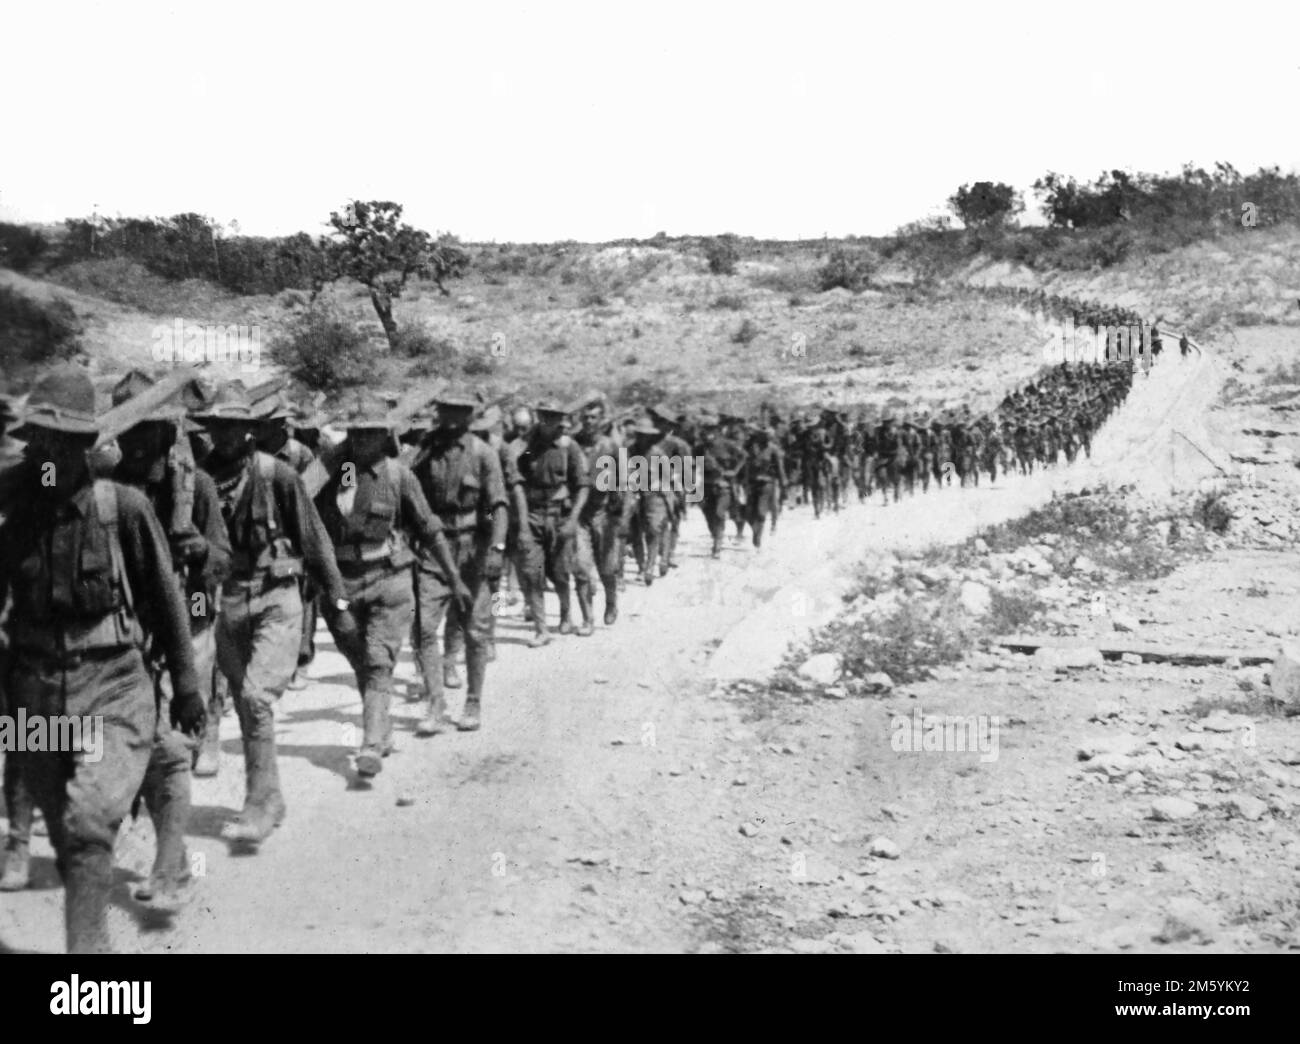 World War 1 American soldiers c. 1917 training in Texas on the march. Stock Photo